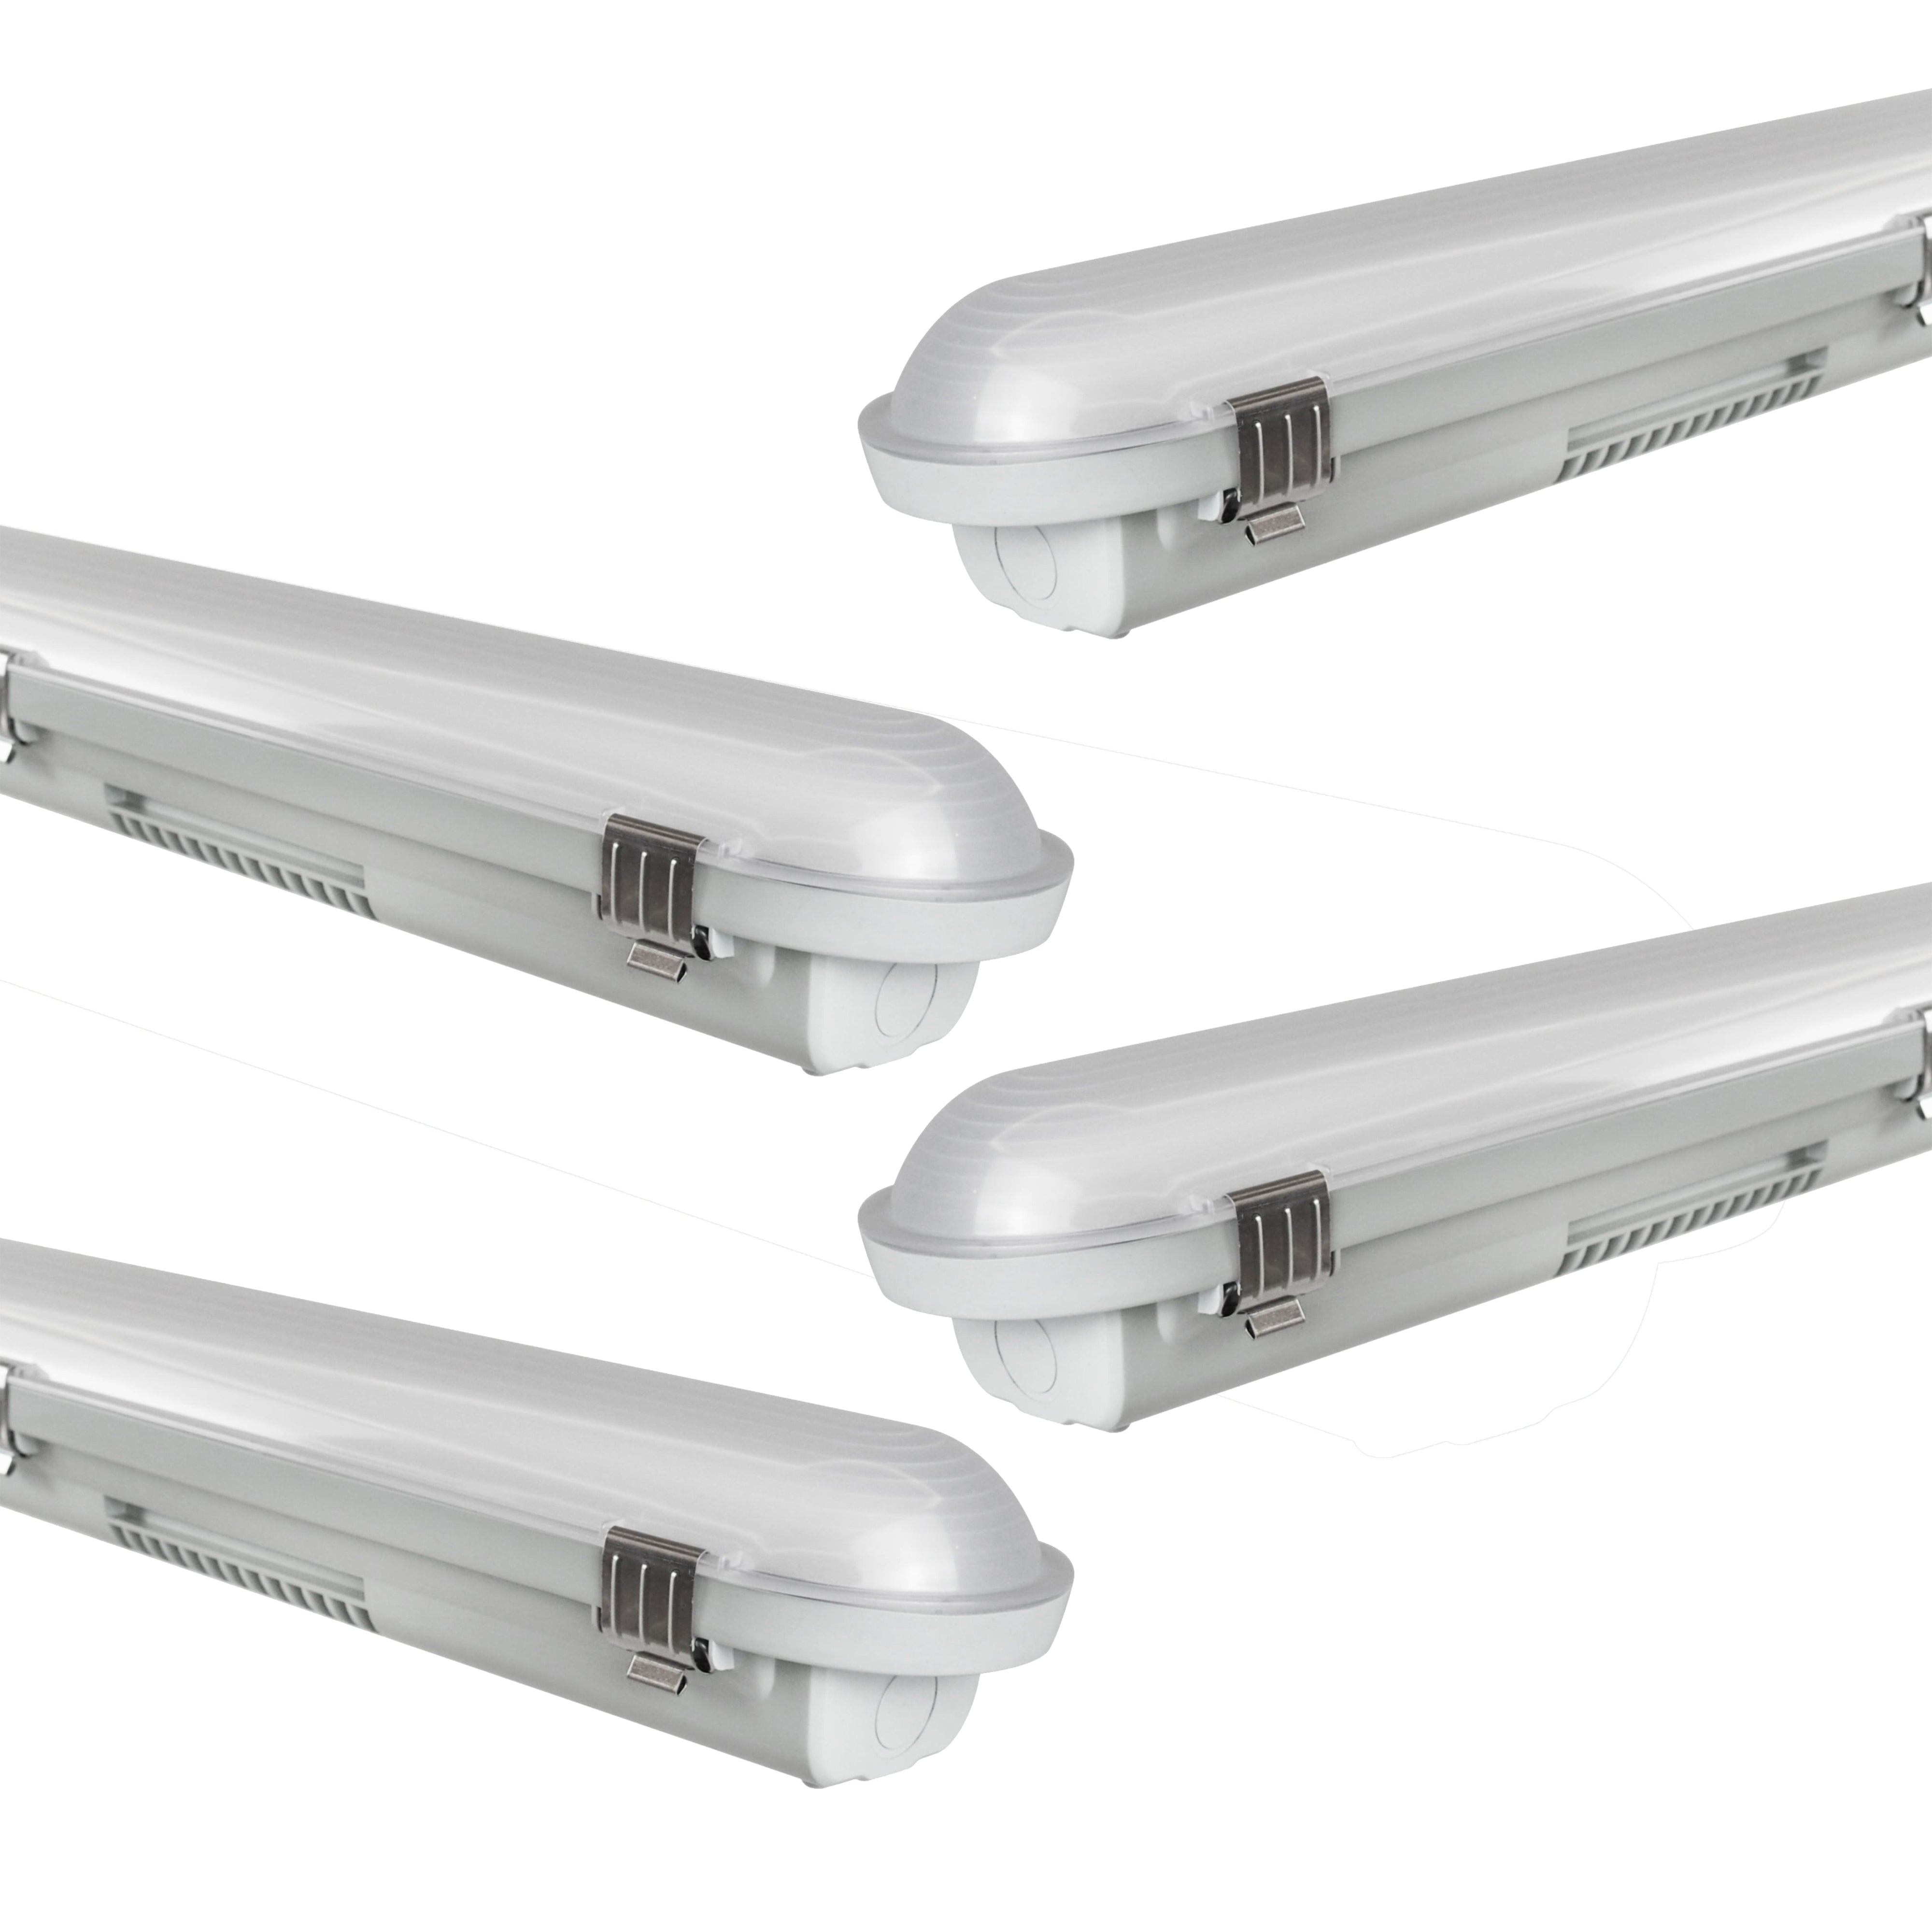 LED Non Corrosive IP65 Batten Fitting Light 120cms 40W 6000K, 4800 Lumens Ultra Bright, Up to 20000 Hours of Operation, Instant Start, Ideal for Parking Lots, Garages